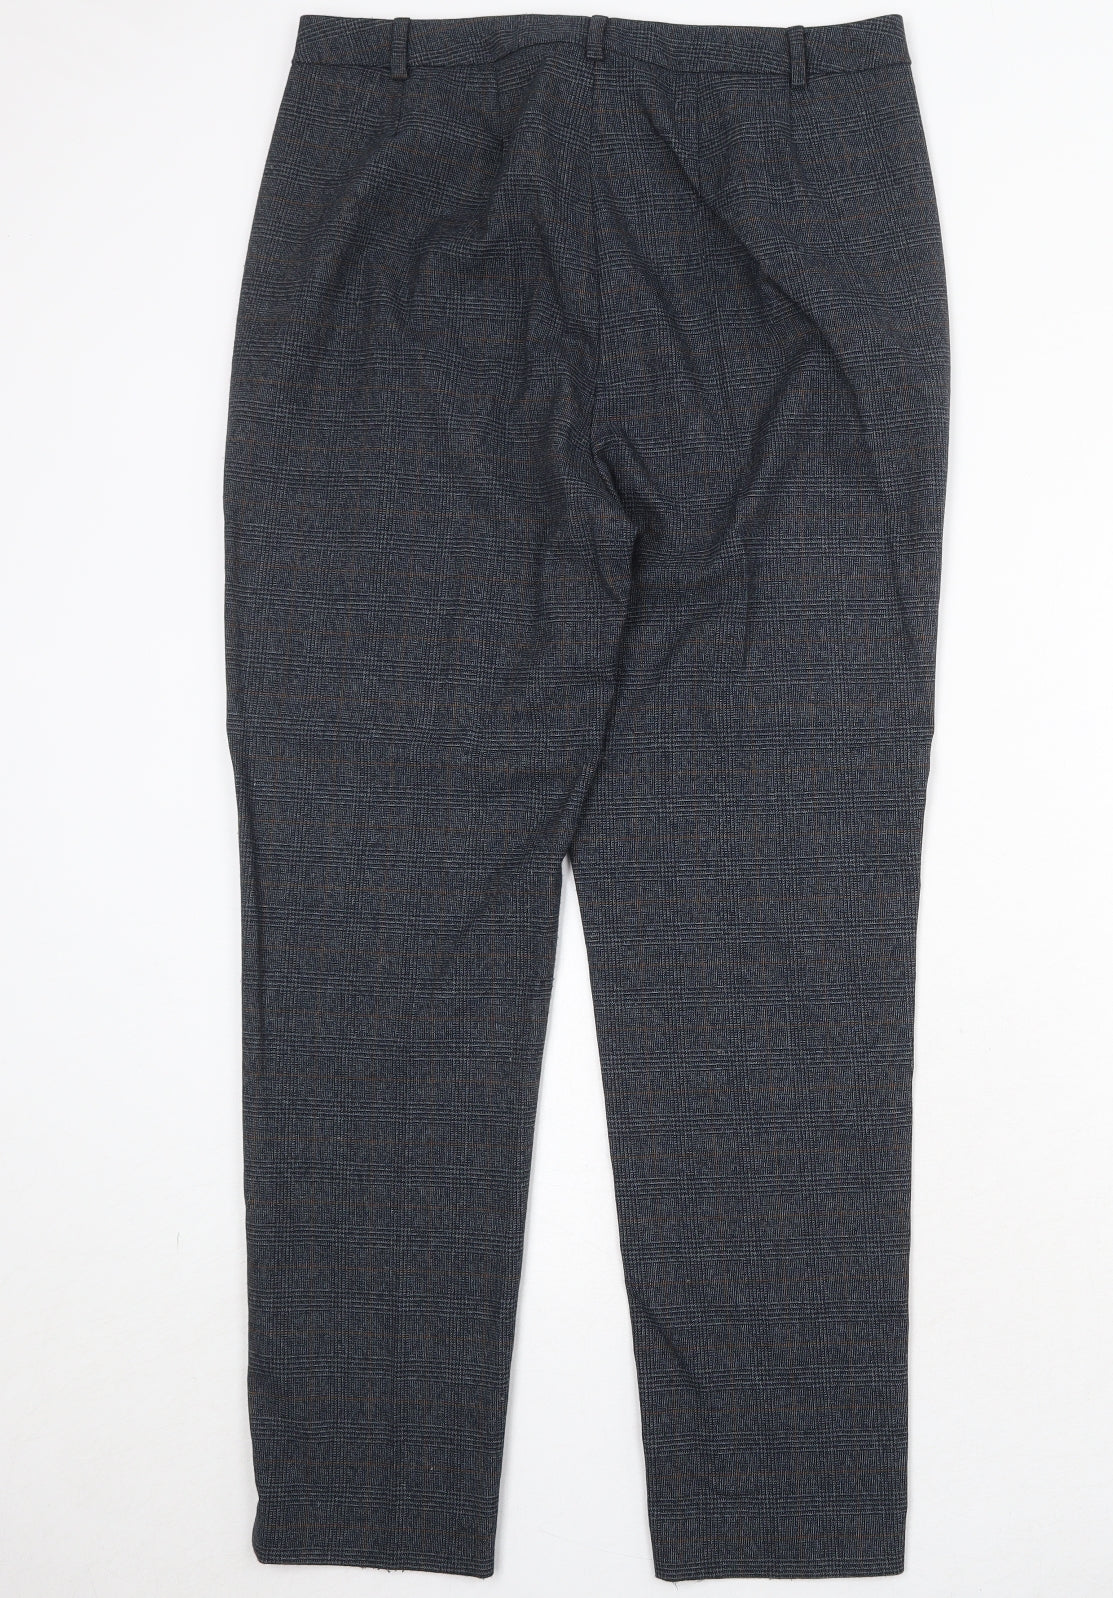 Marks and Spencer Womens Black Plaid Polyester Trousers Size 14 Regular Zip